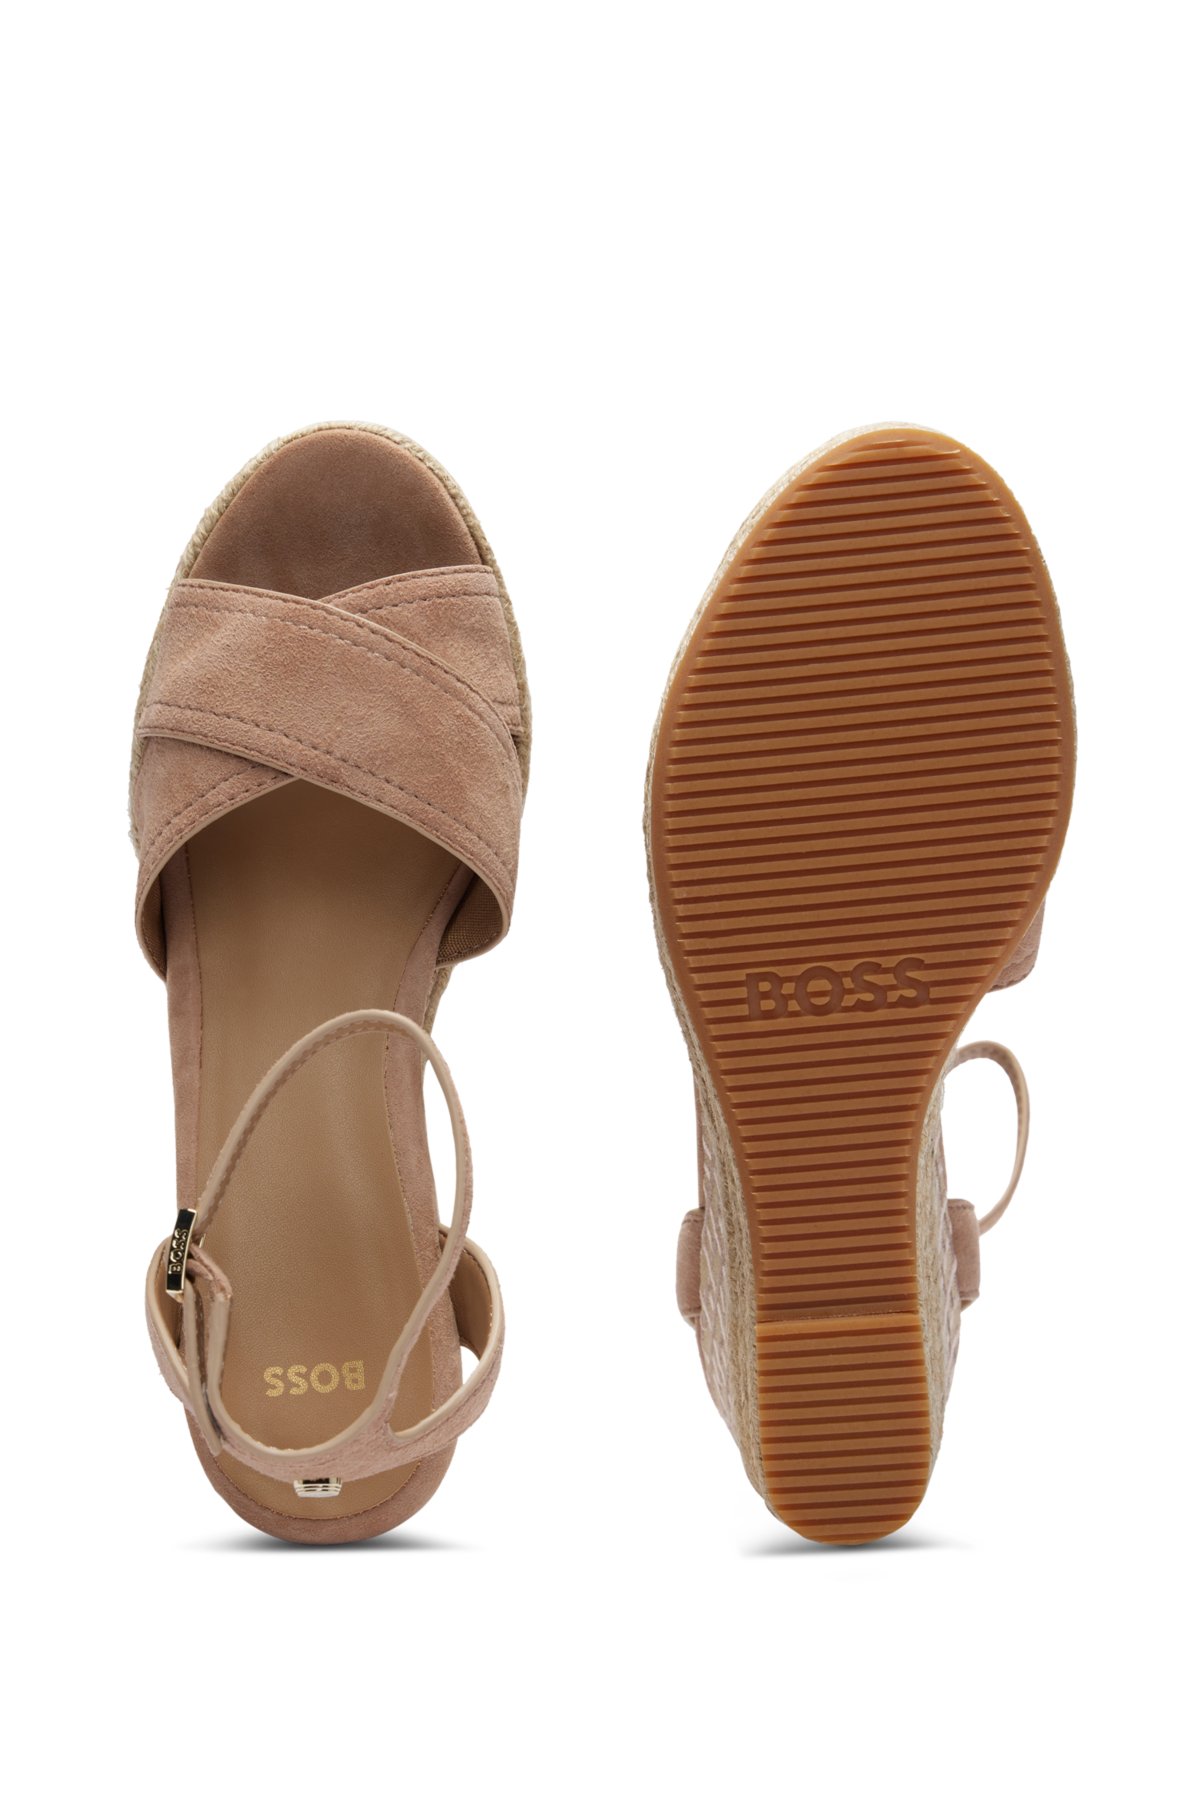 Suede sandals with monogram-patterned wedge and ankle strap, Light Brown